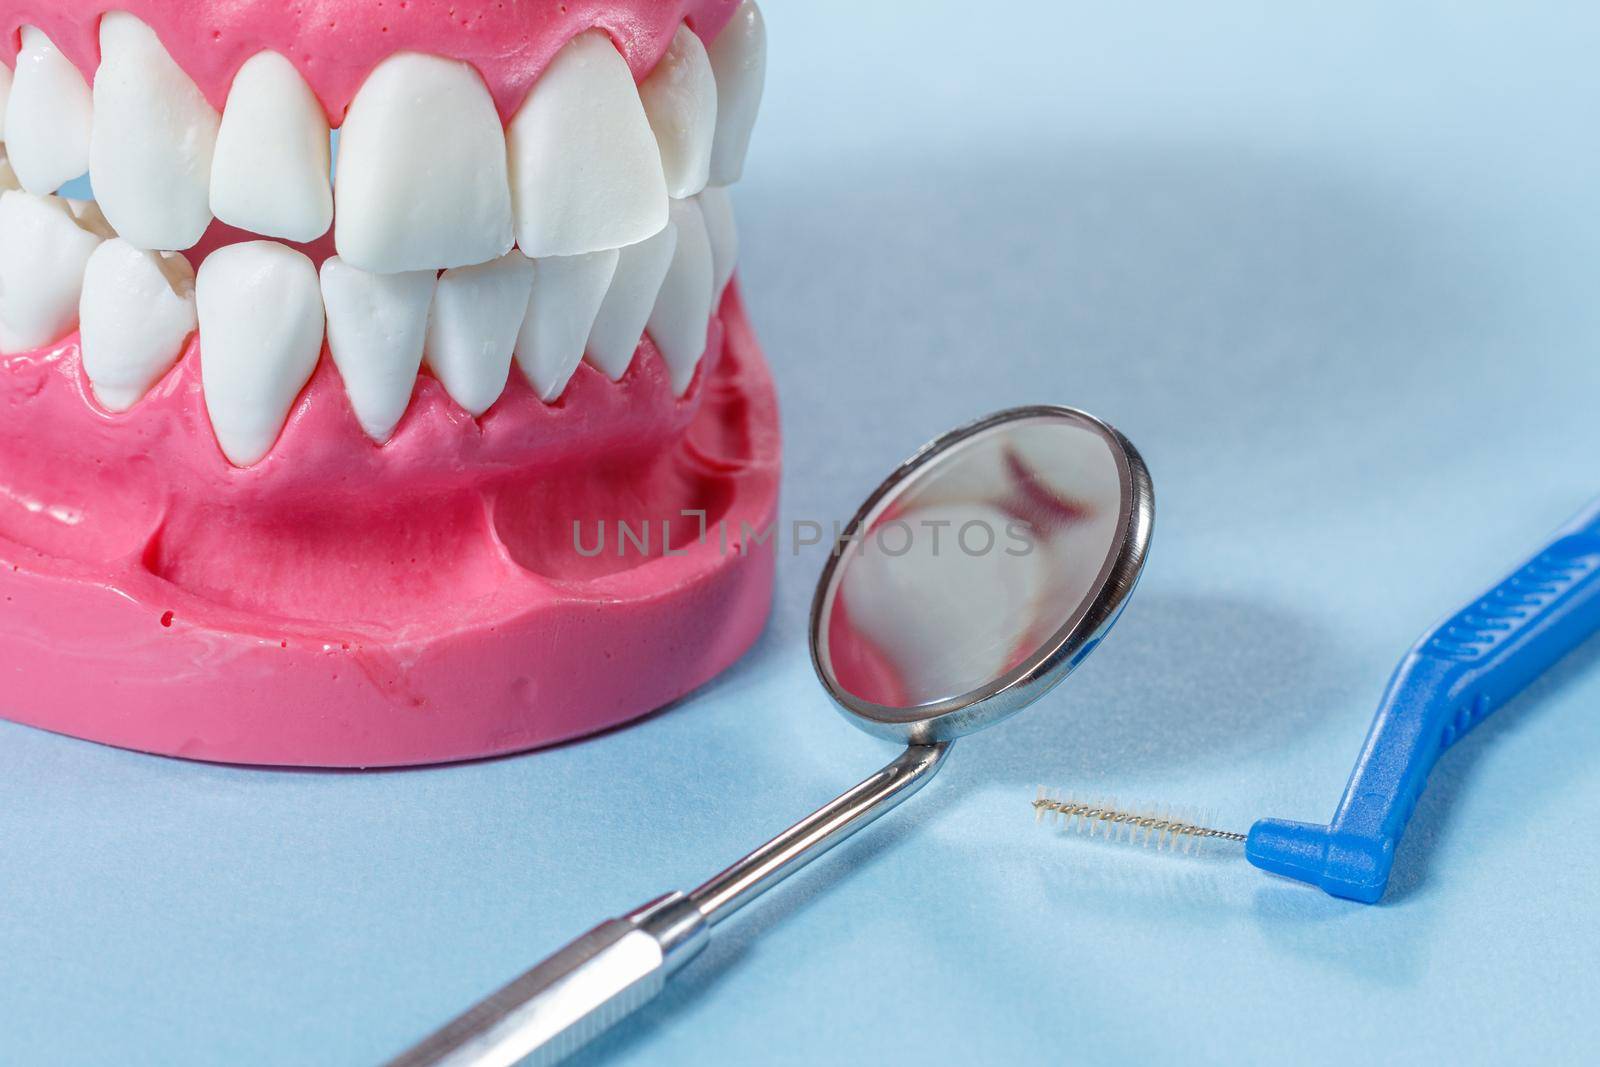 Close-up view of a metal mirror, a interdental brush and a human jaw layout on the background.